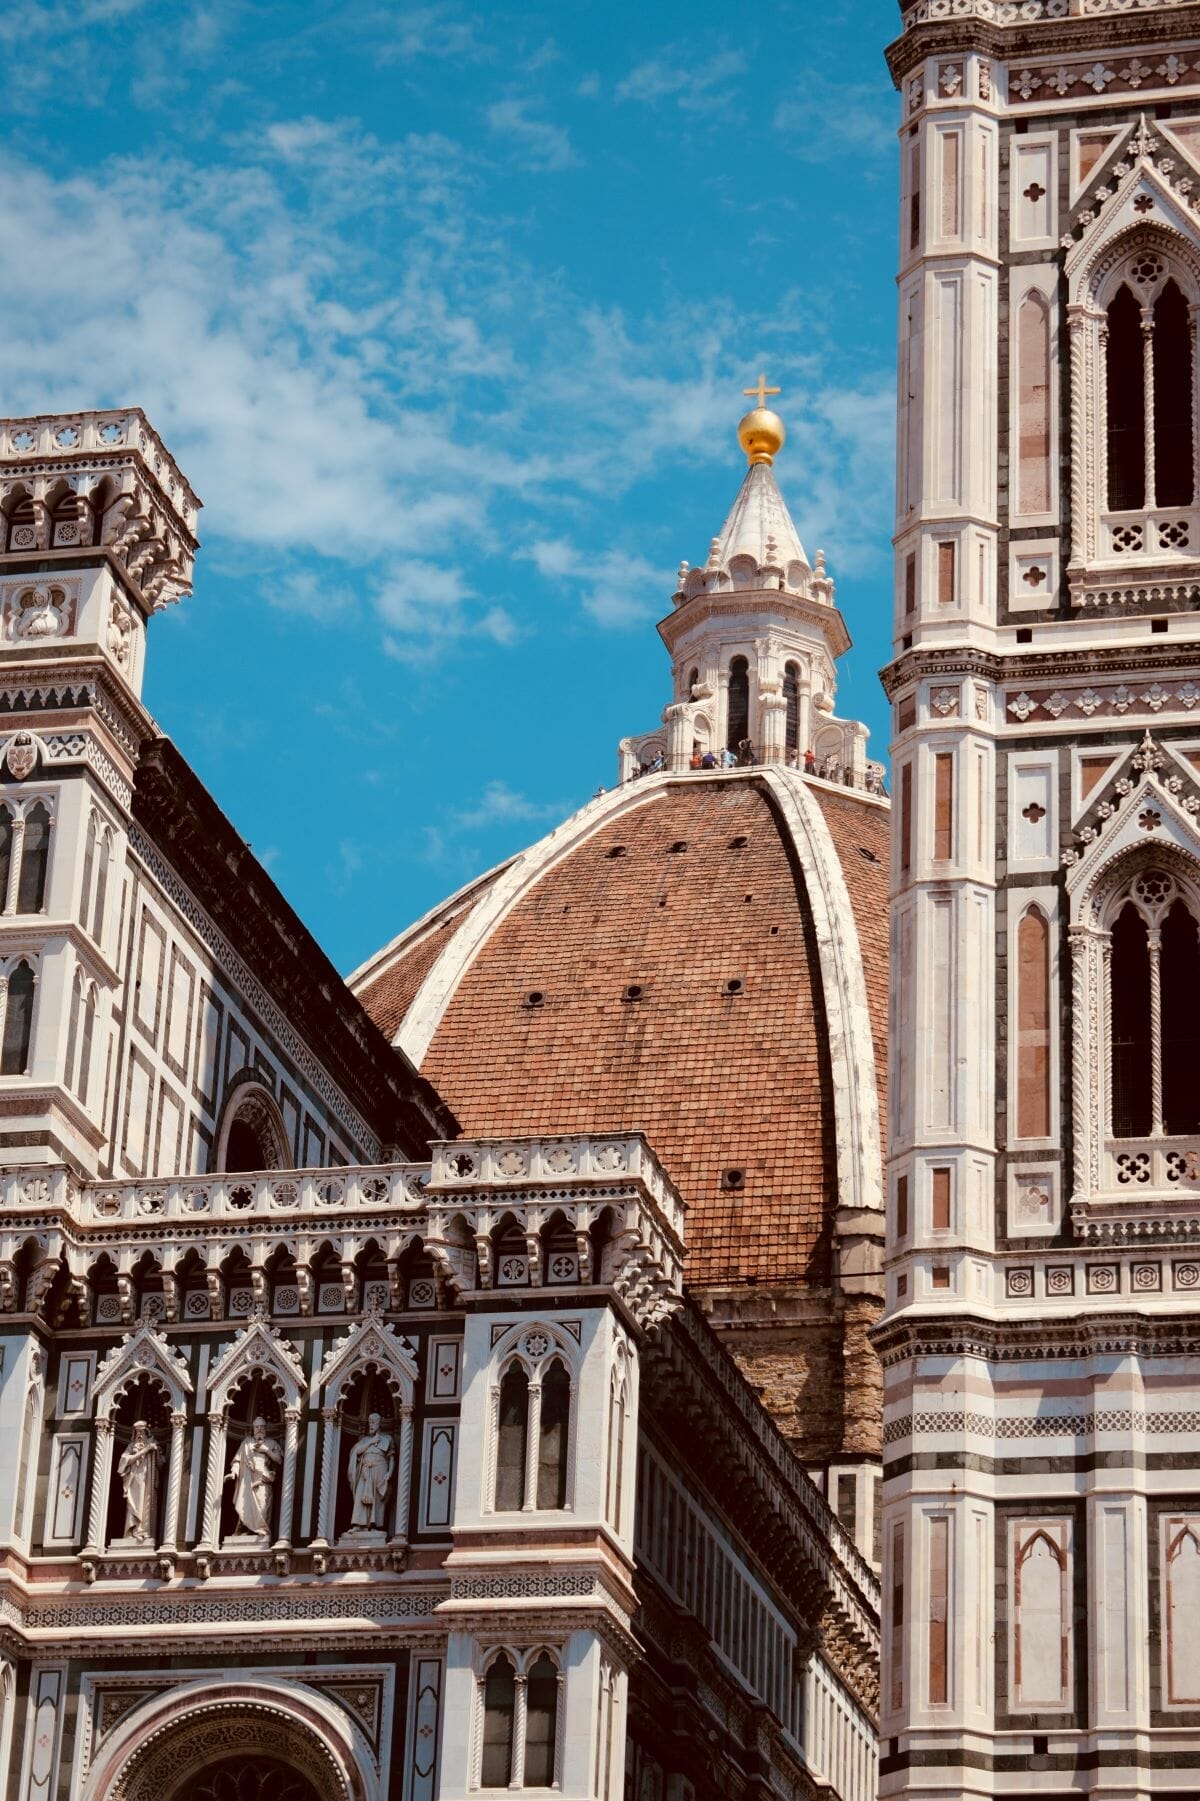 A view of the Duomo in Florence, focusing on the dome